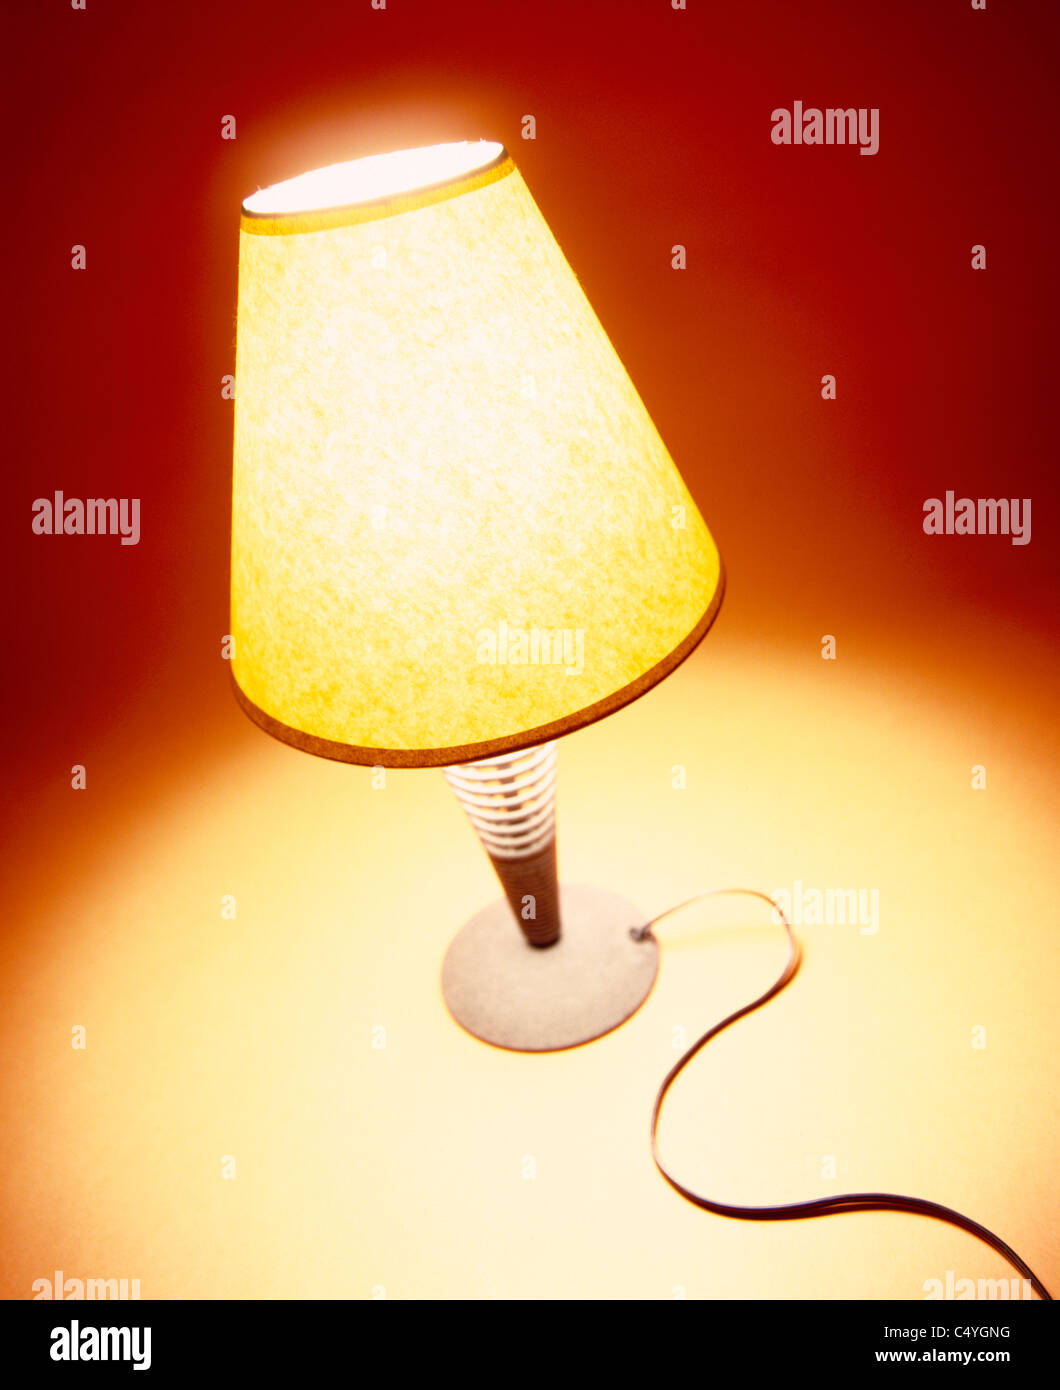 A small desk lamp with a warm light glowing Stock Photo